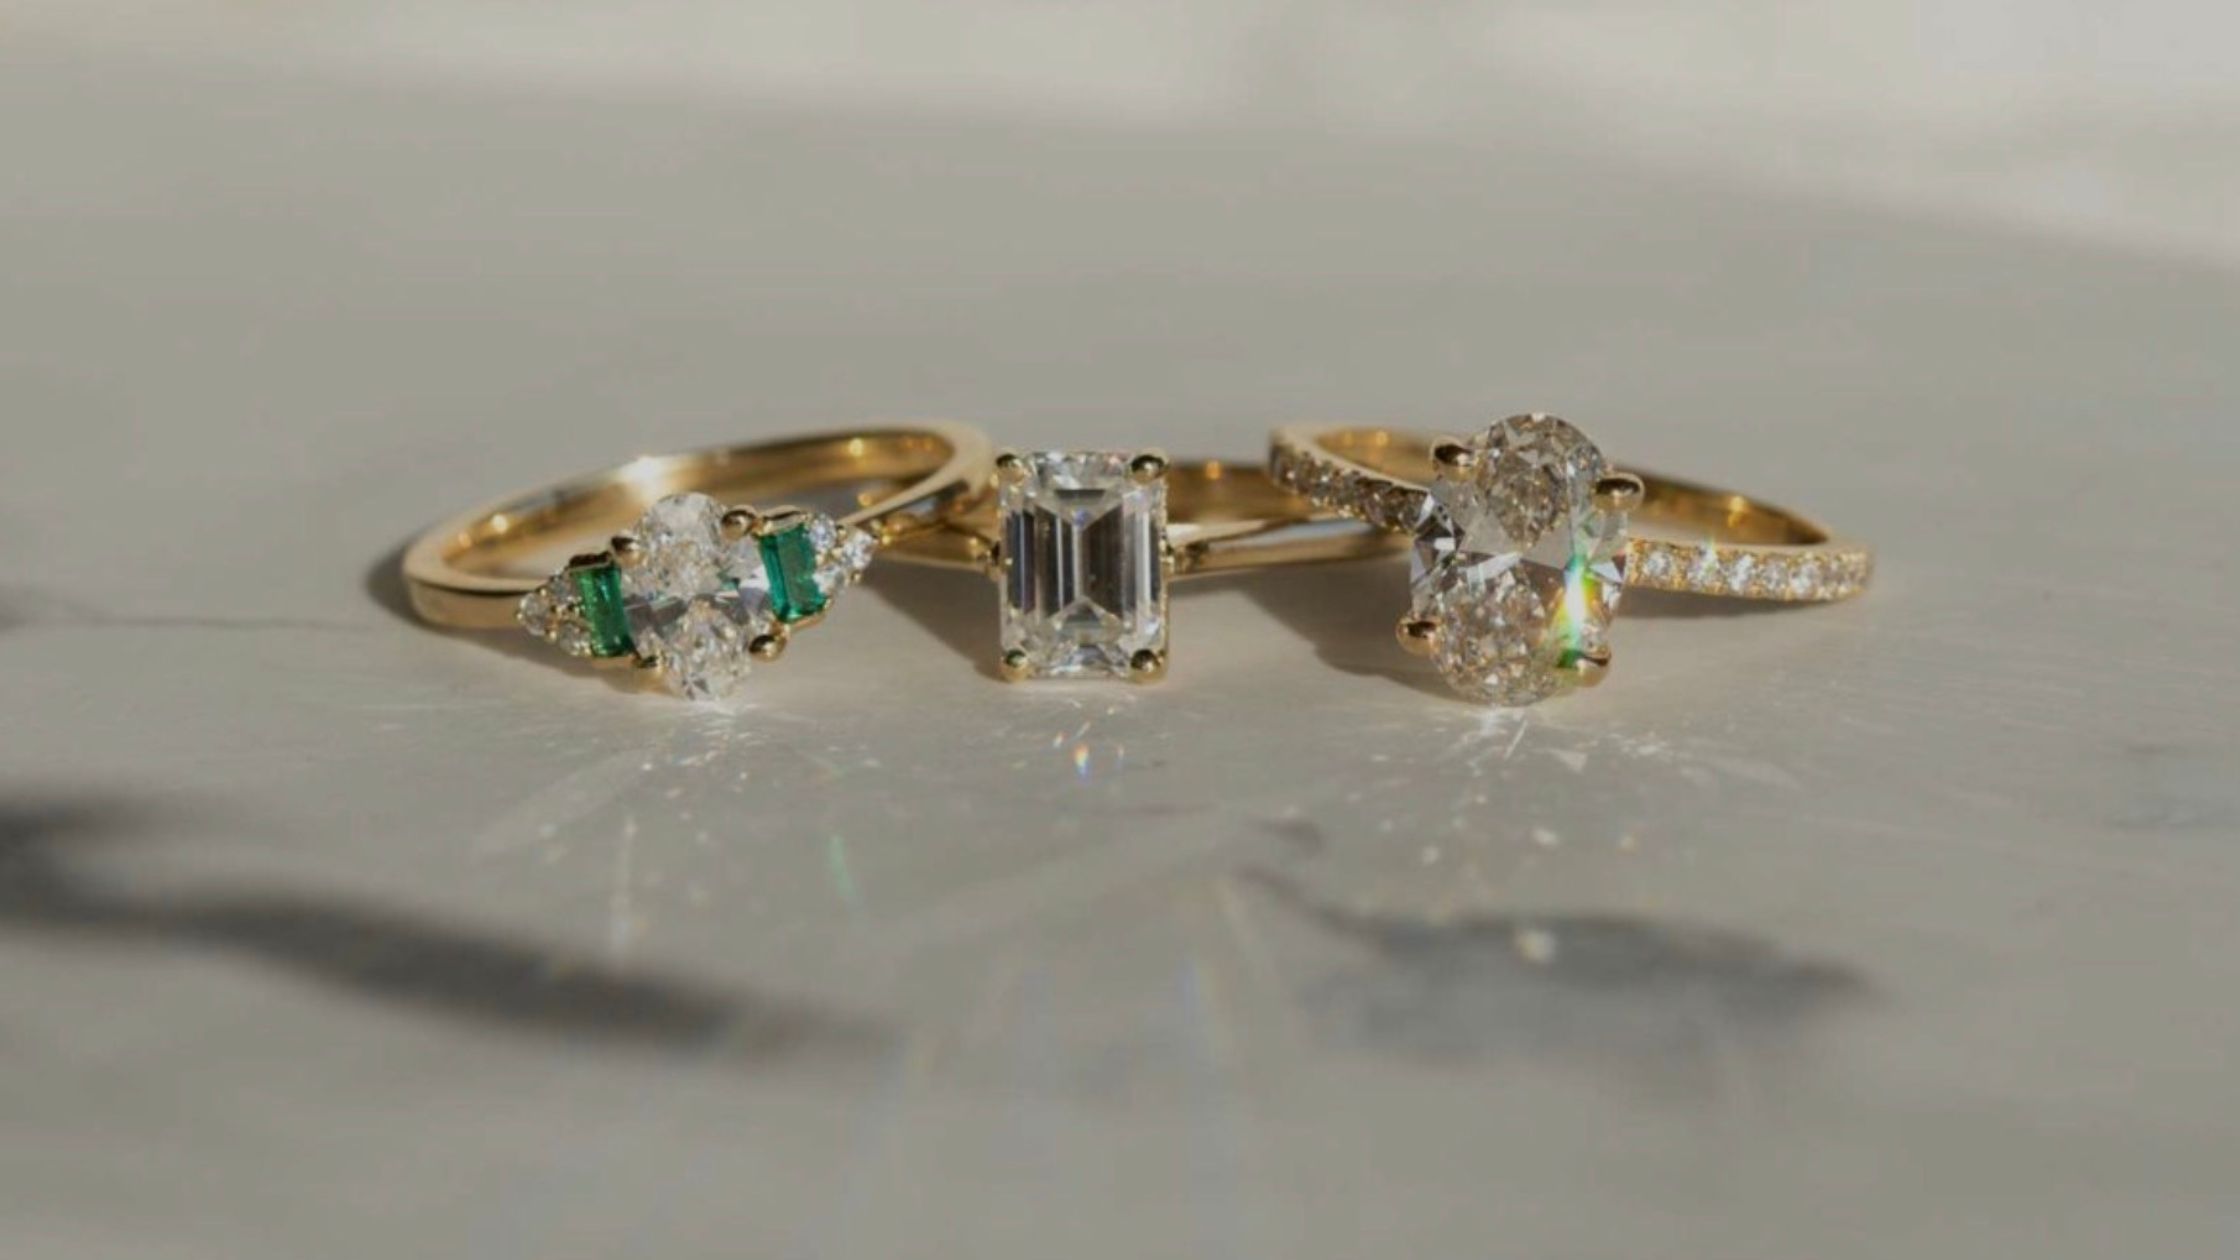 Ethical Brand Directory Ethica Diamonds HERO Ethically made, land grown diamonds and jewellery Wedding bands and engagement rings